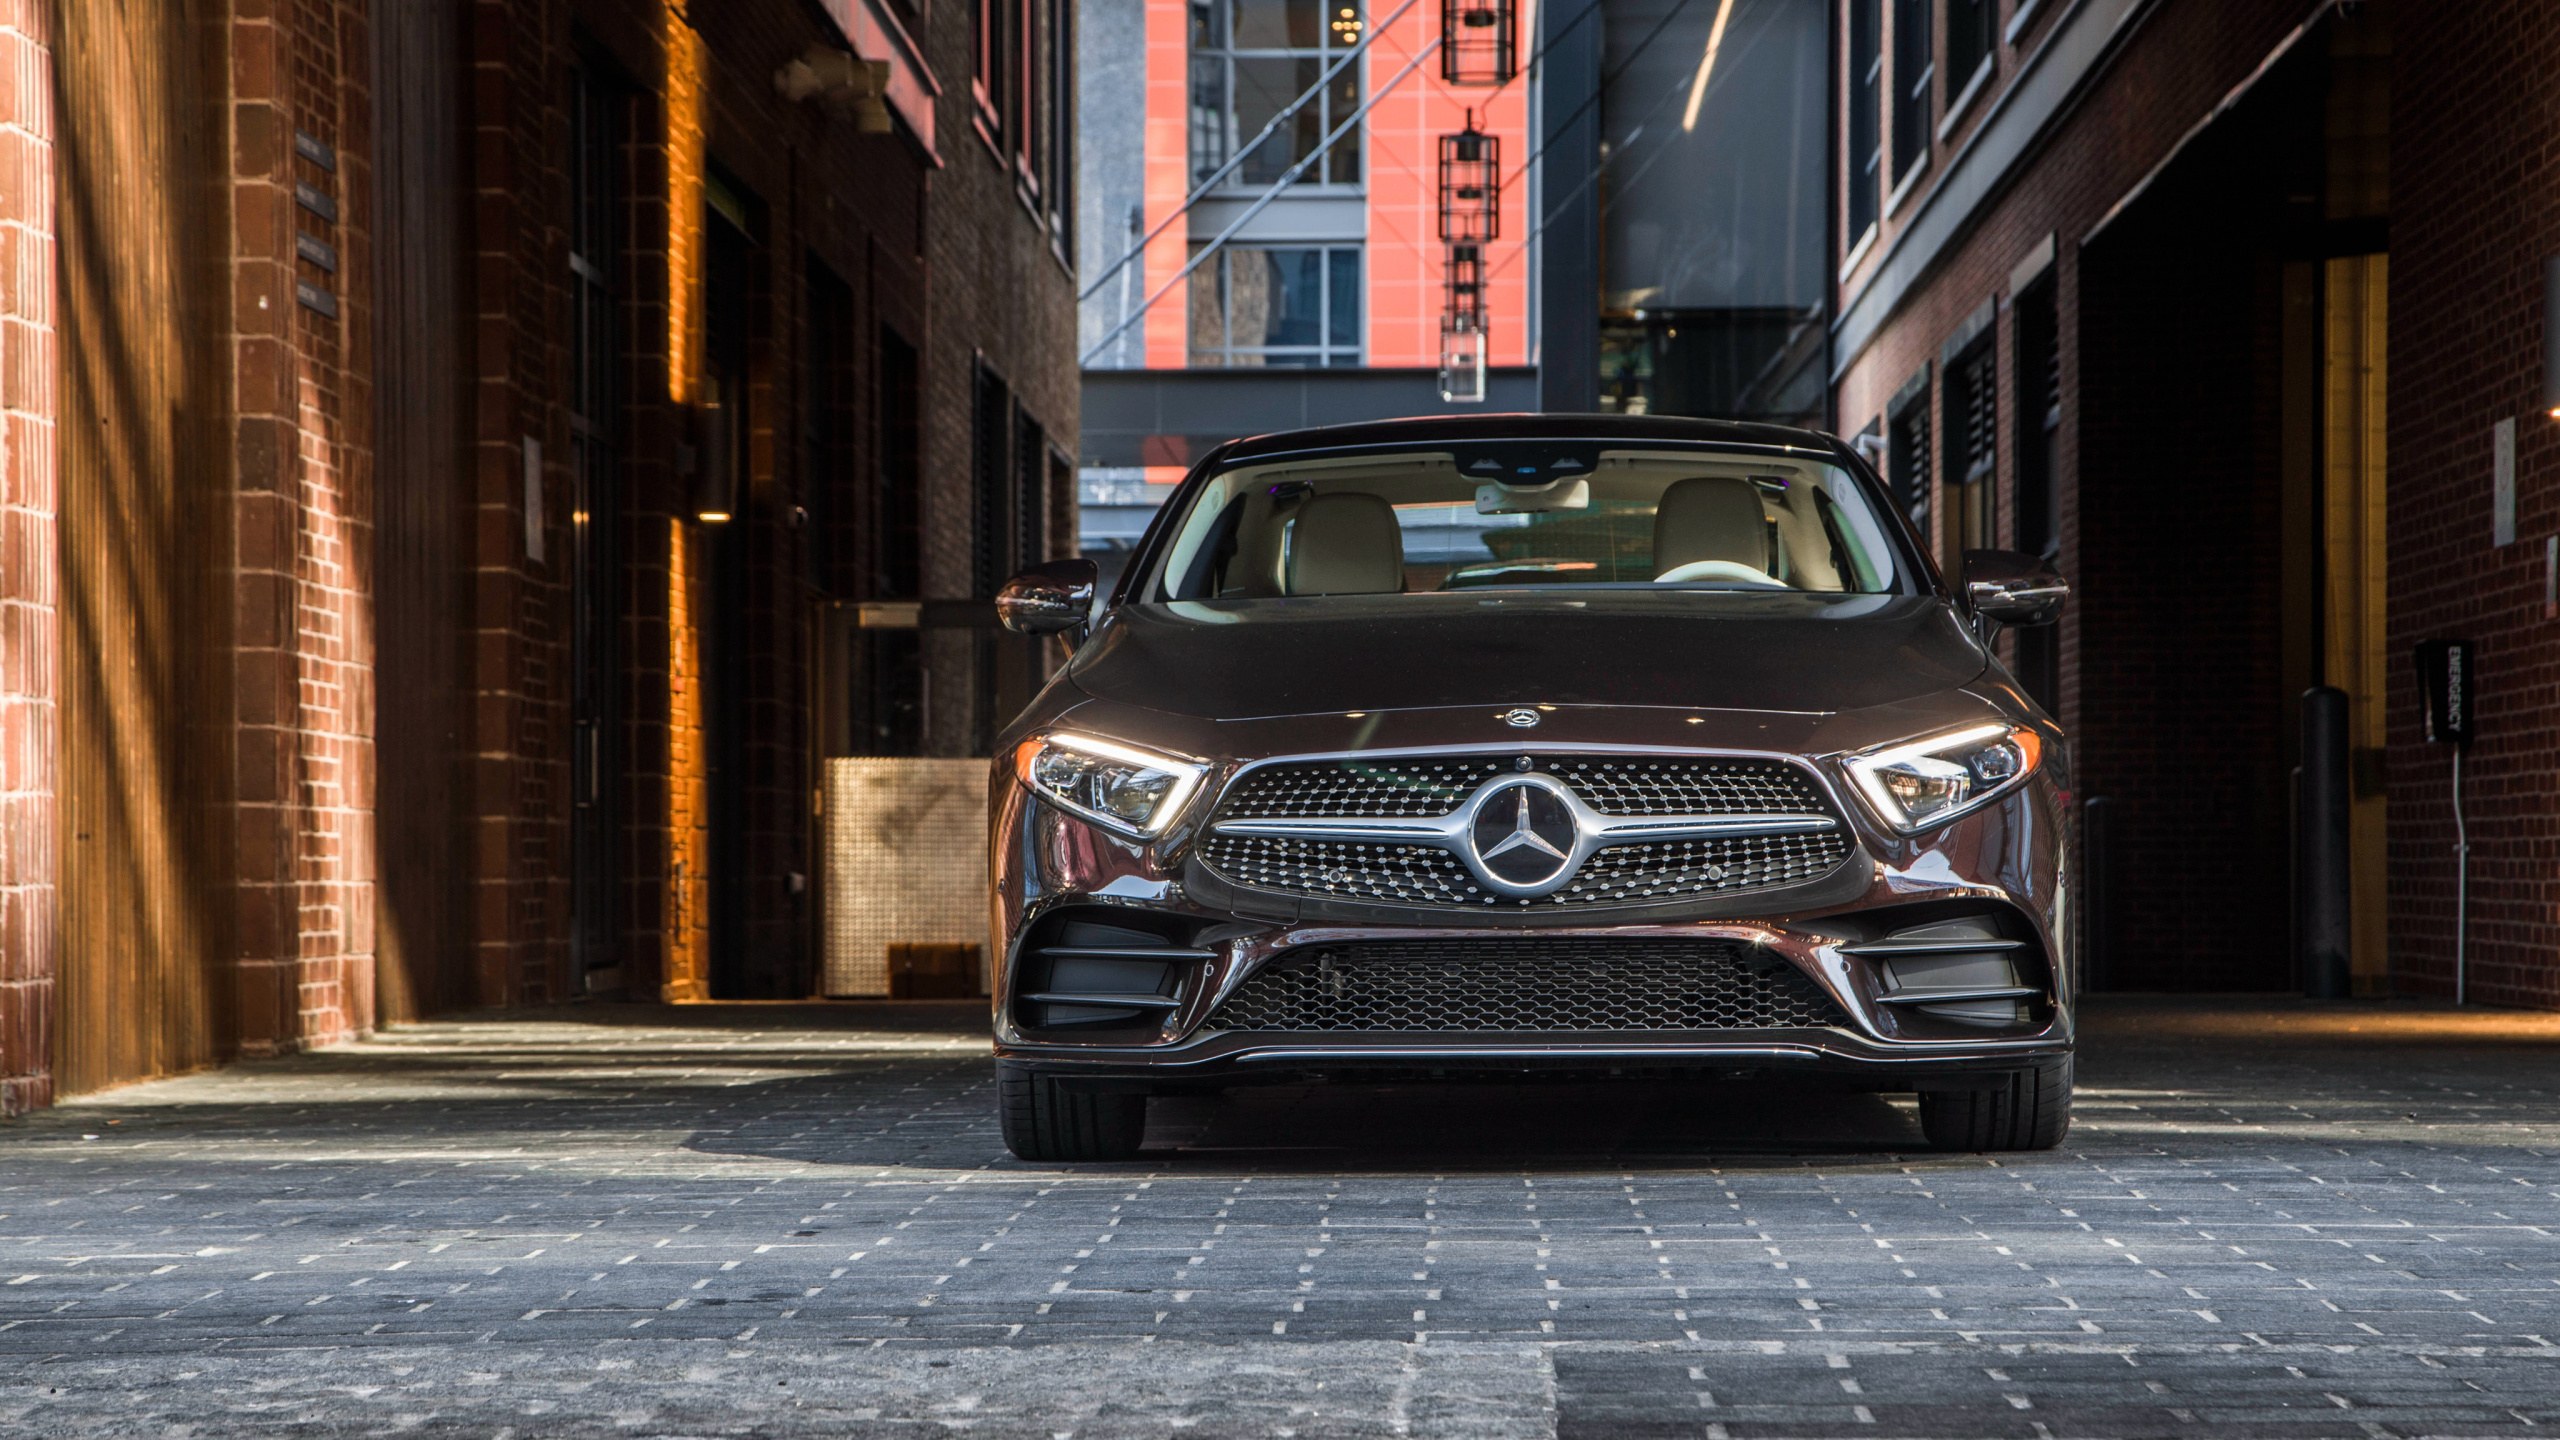 Black Mercedes Benz Car Parked Beside Brown Building During Daytime. Wallpaper in 2560x1440 Resolution